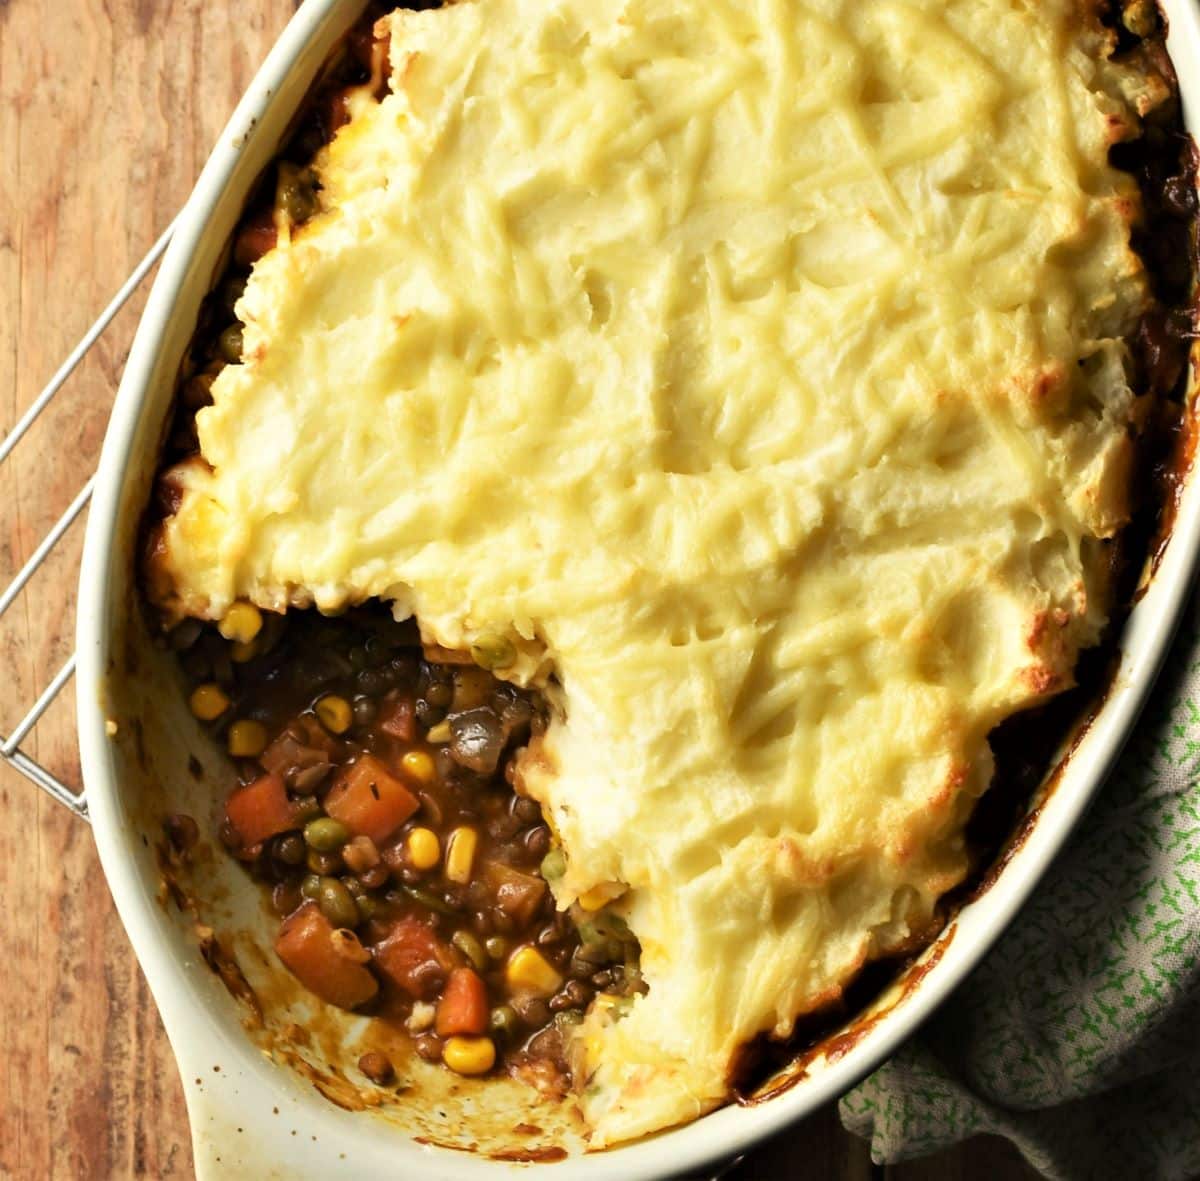 Top down partial view of lentil vegetable shepherd's pie in oval dish.